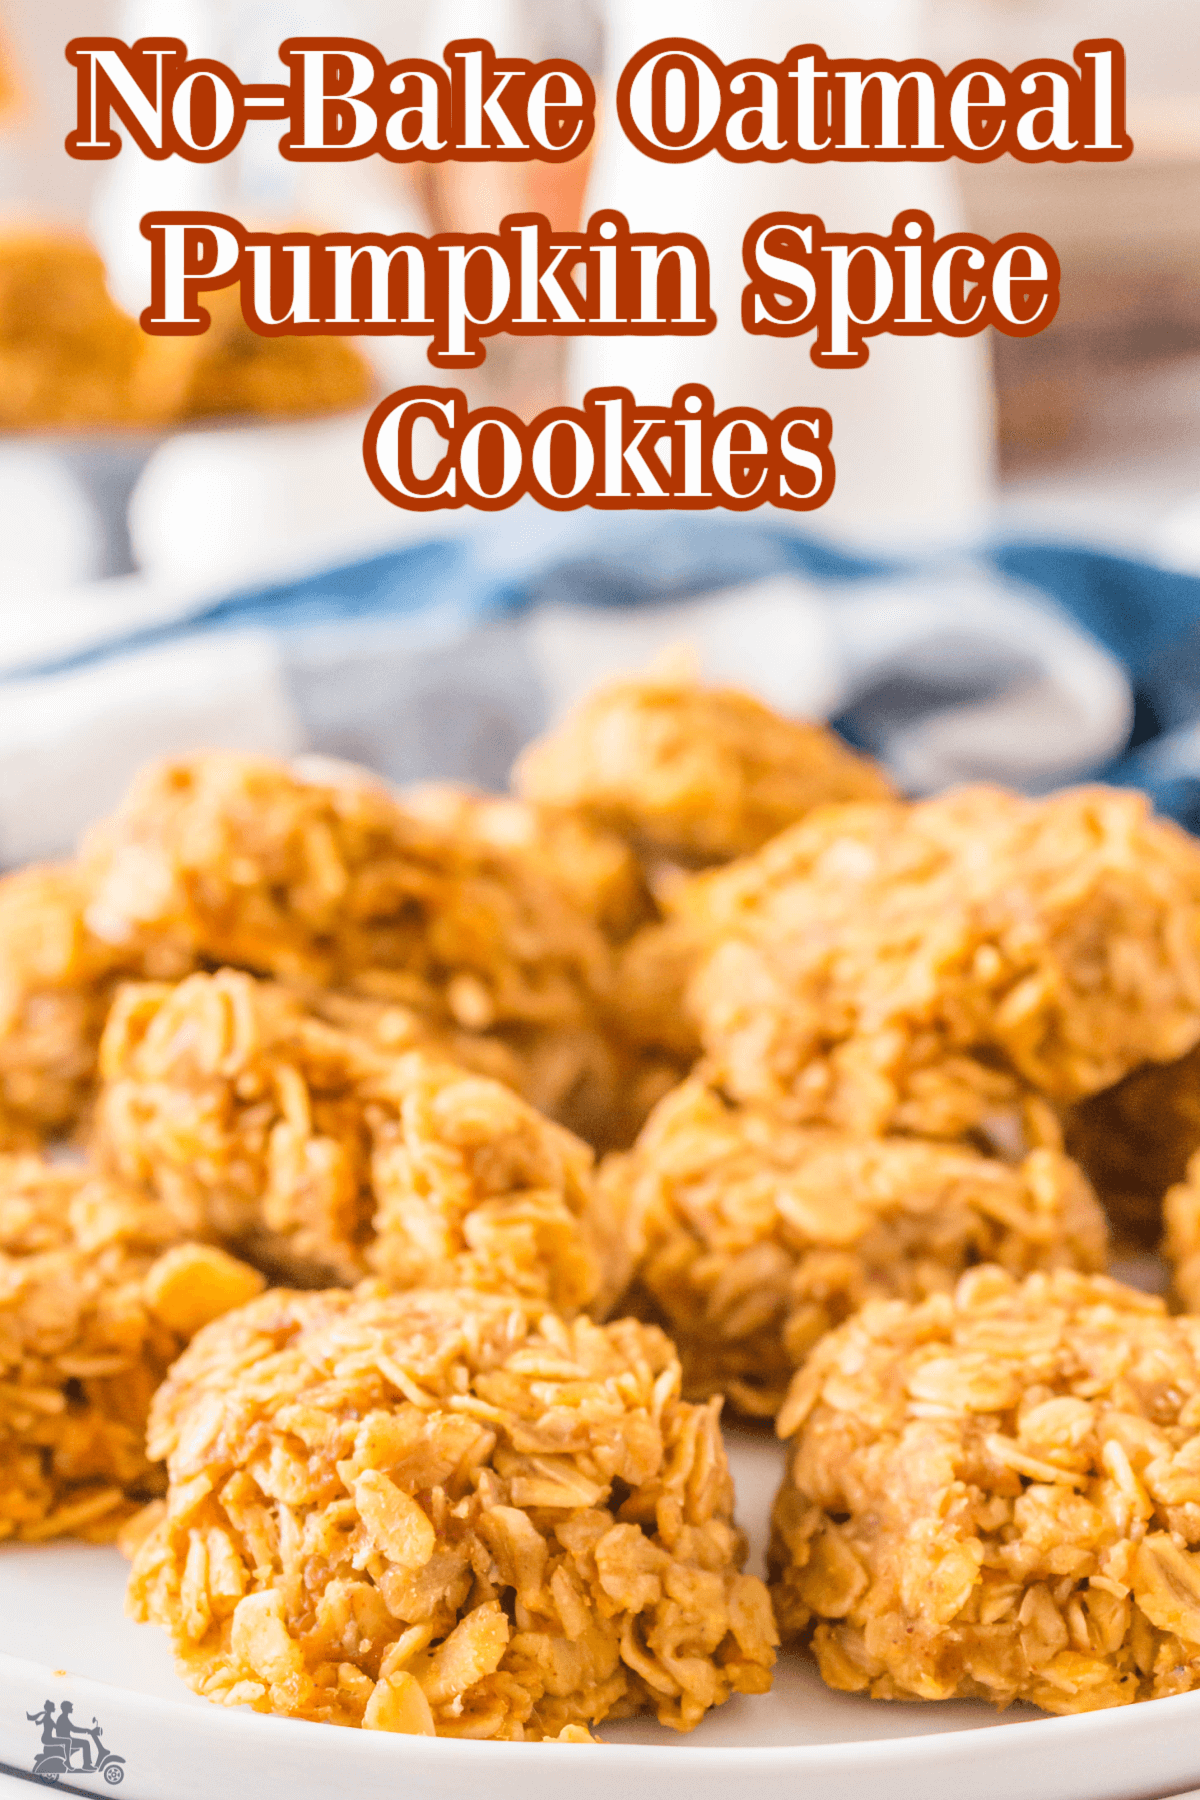 No-bake oatmeal cookies made with pumpkin and pumpkin spice. 